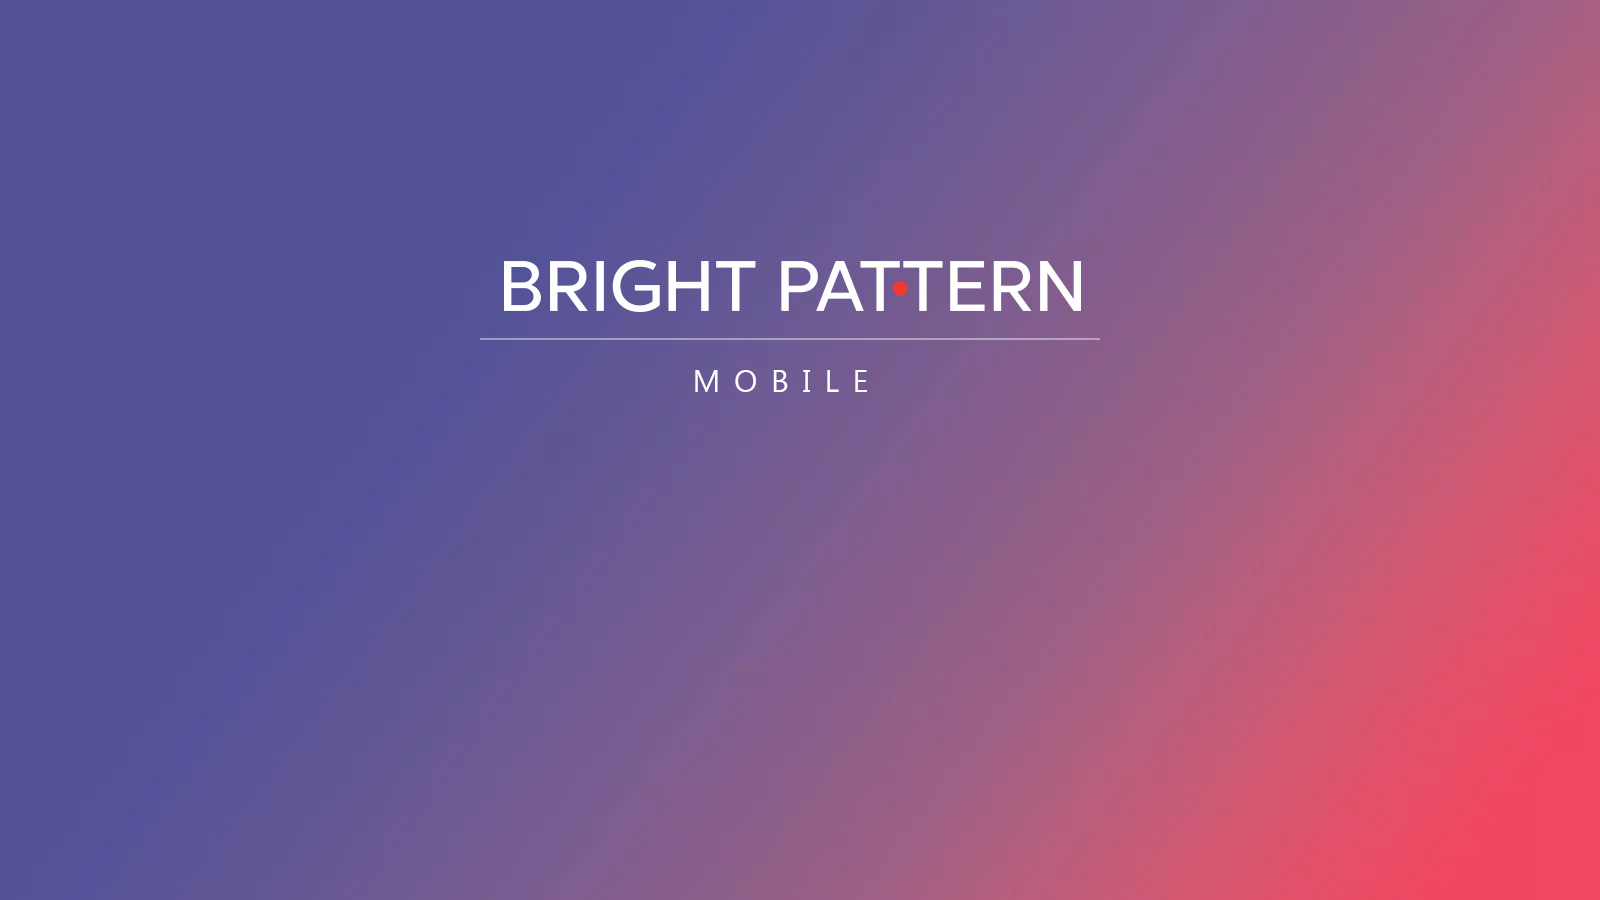 Bright Pattern Mobile Empowers Any Employee in the Enterprise to Improve CX